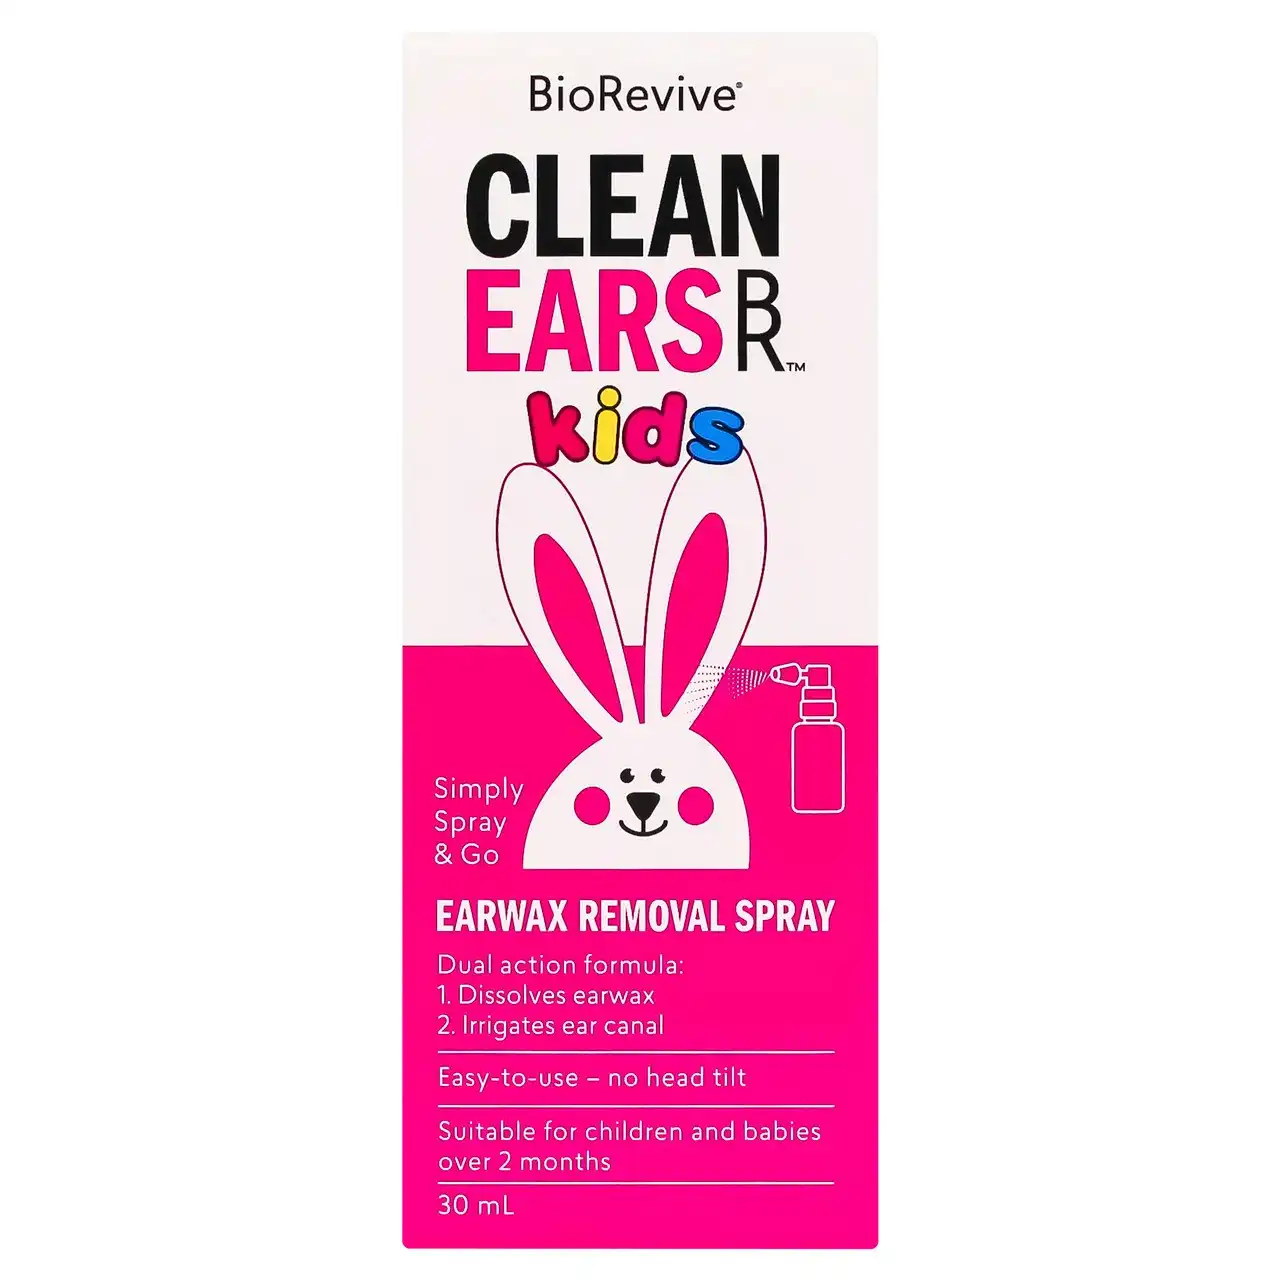 BioRevive CleanEars Kids - Earwax Removal Spray 30mL